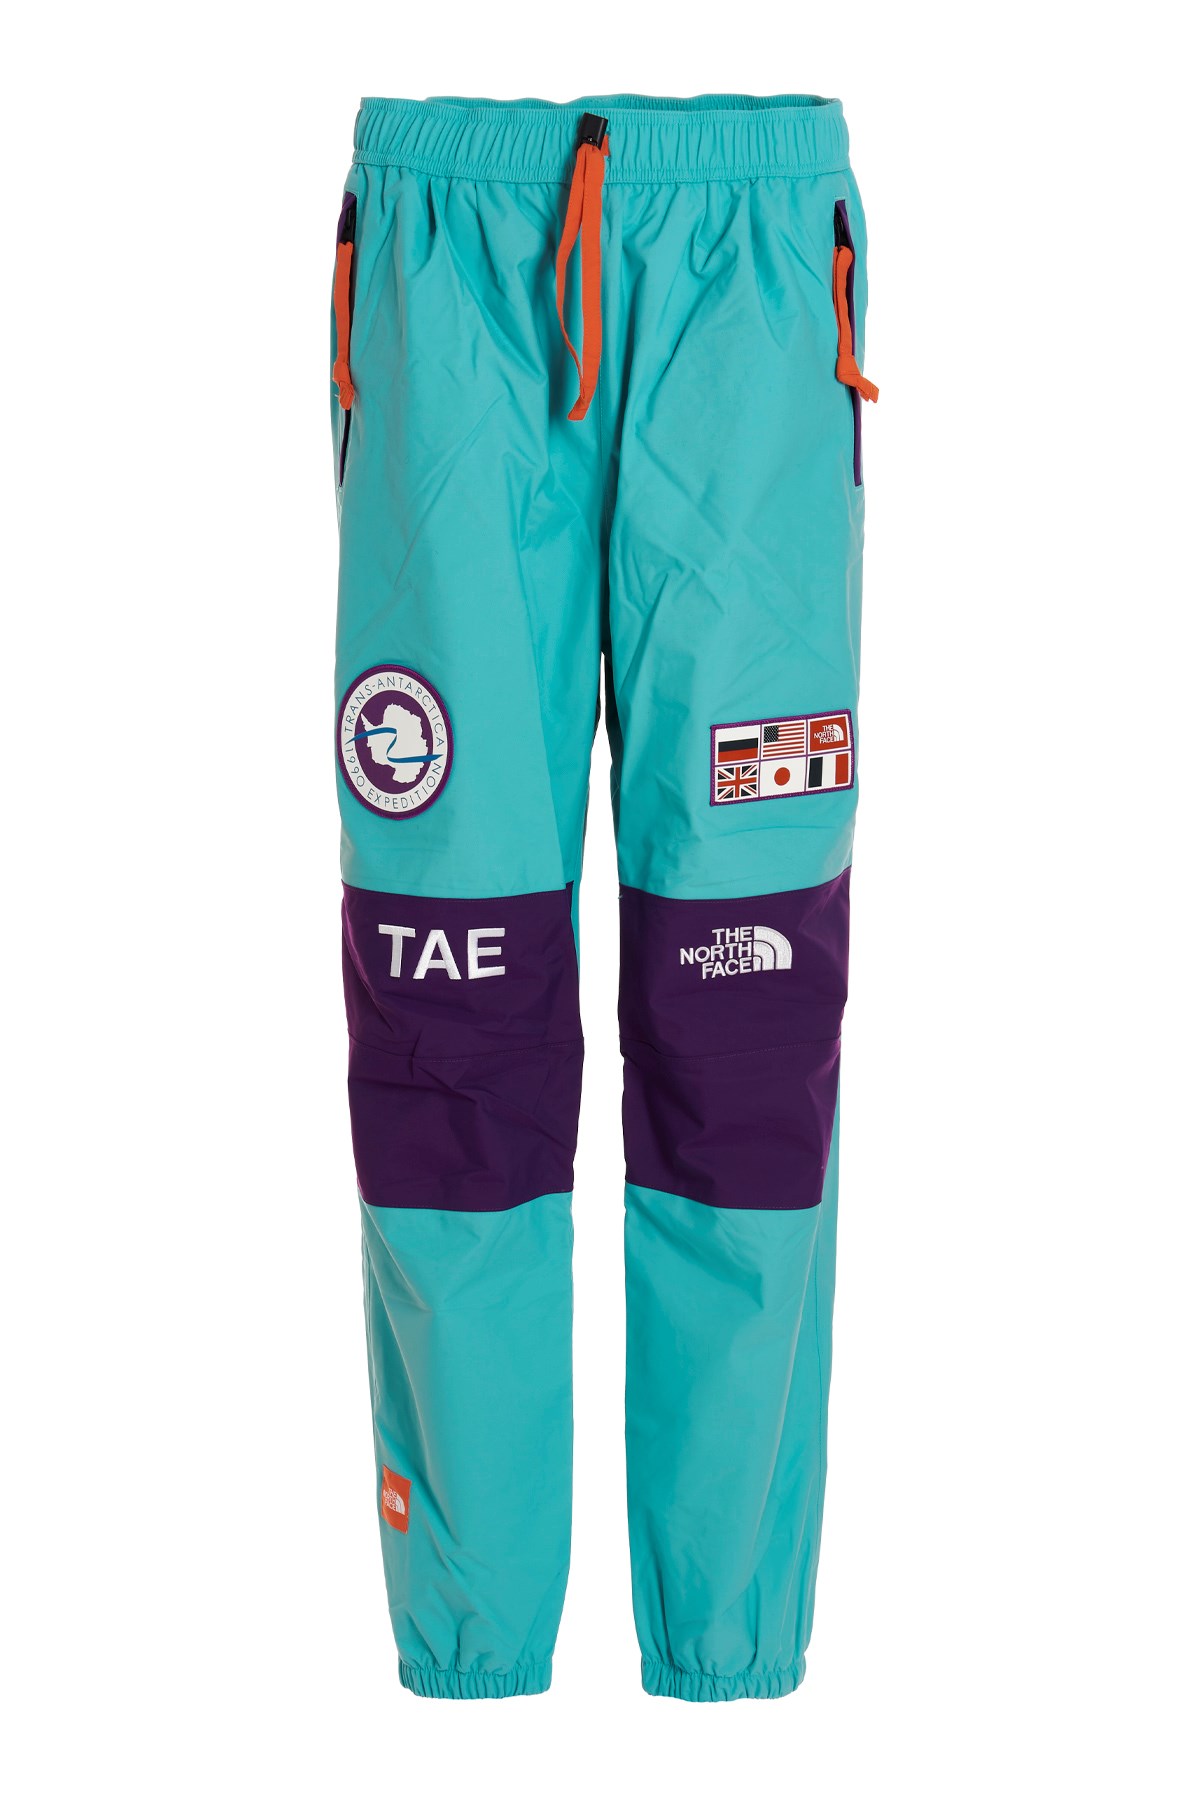 THE NORTH FACE The North Face Capsule Transantarctic Joggers